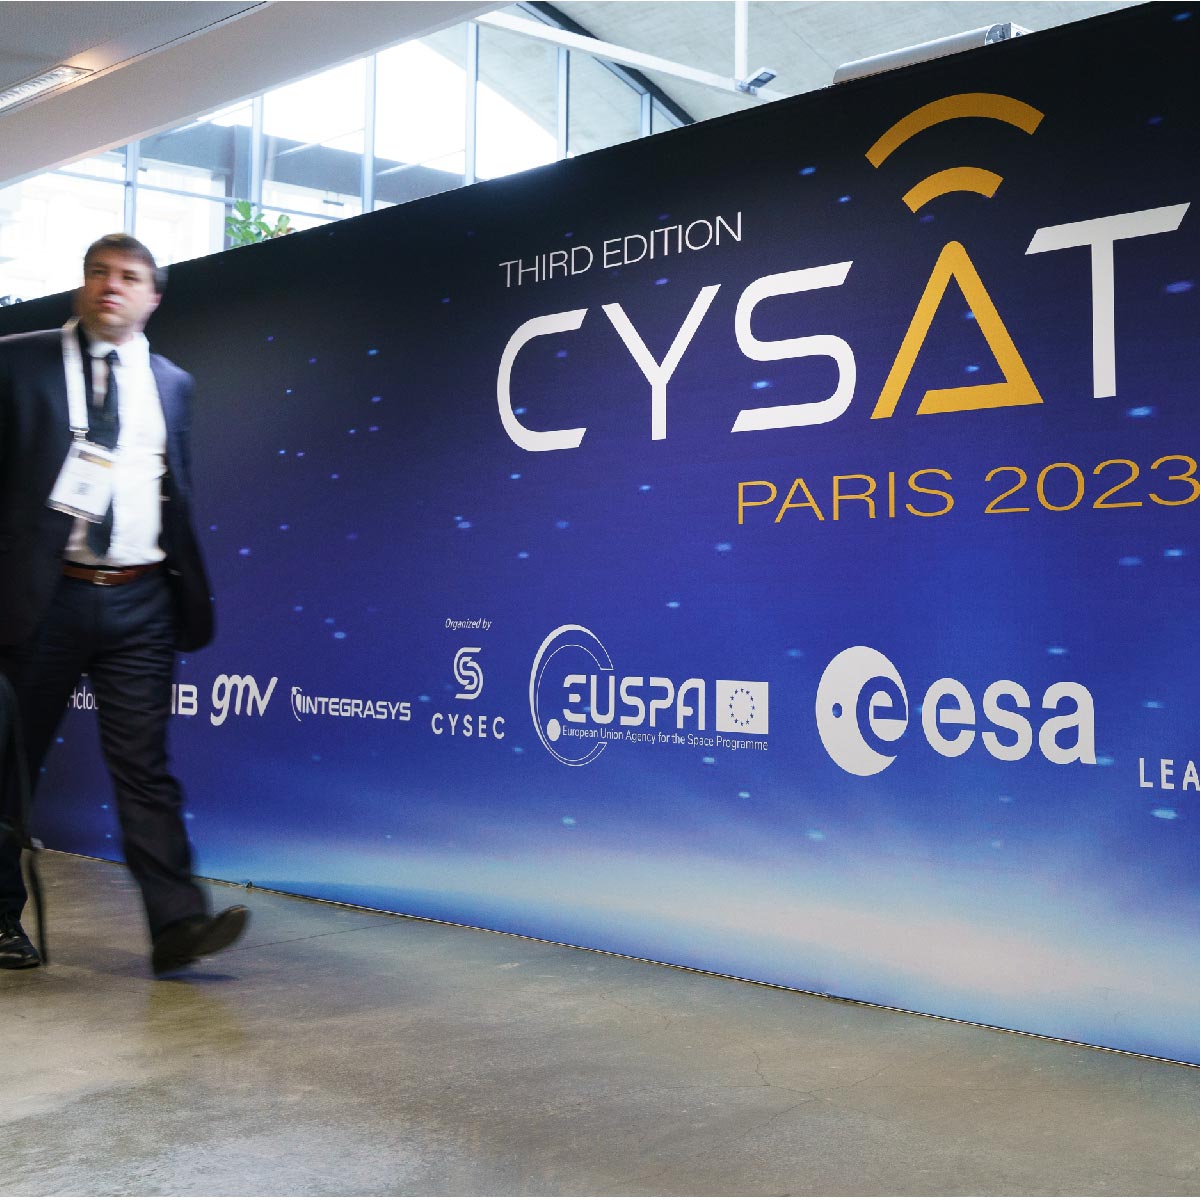 CYSAT empowers its live conferences with Vodalys